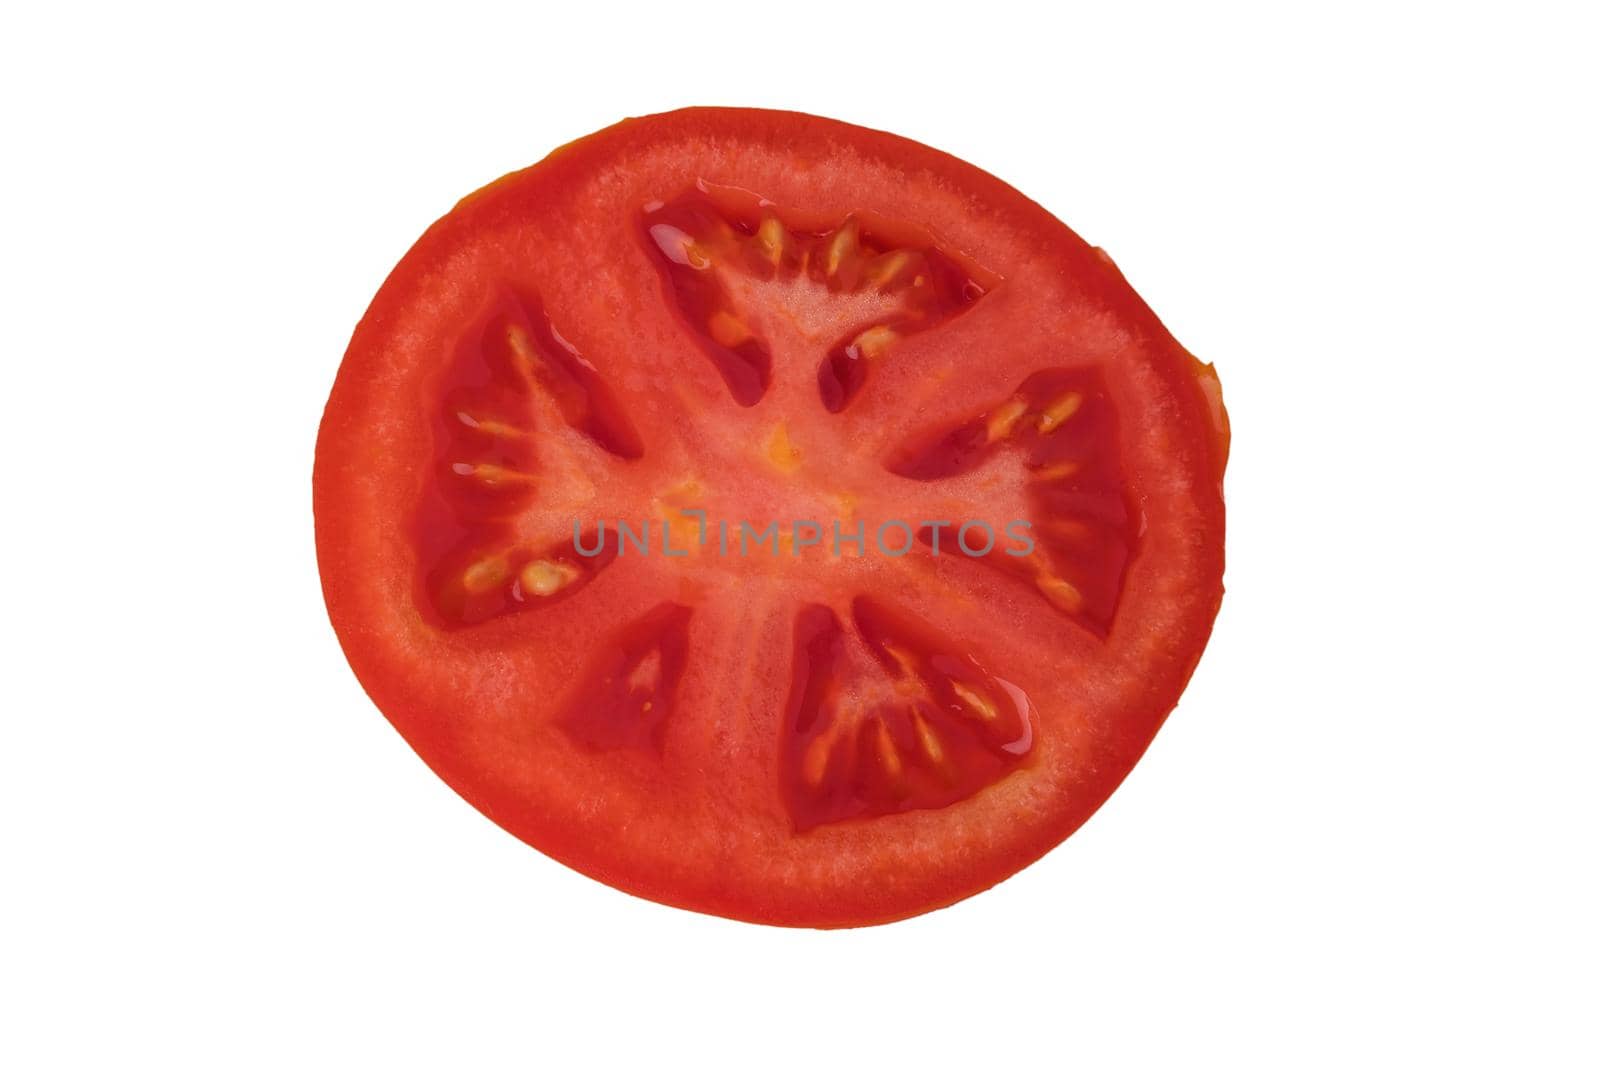 Sliced red tomatoes in slices, slices on a white background in isolation